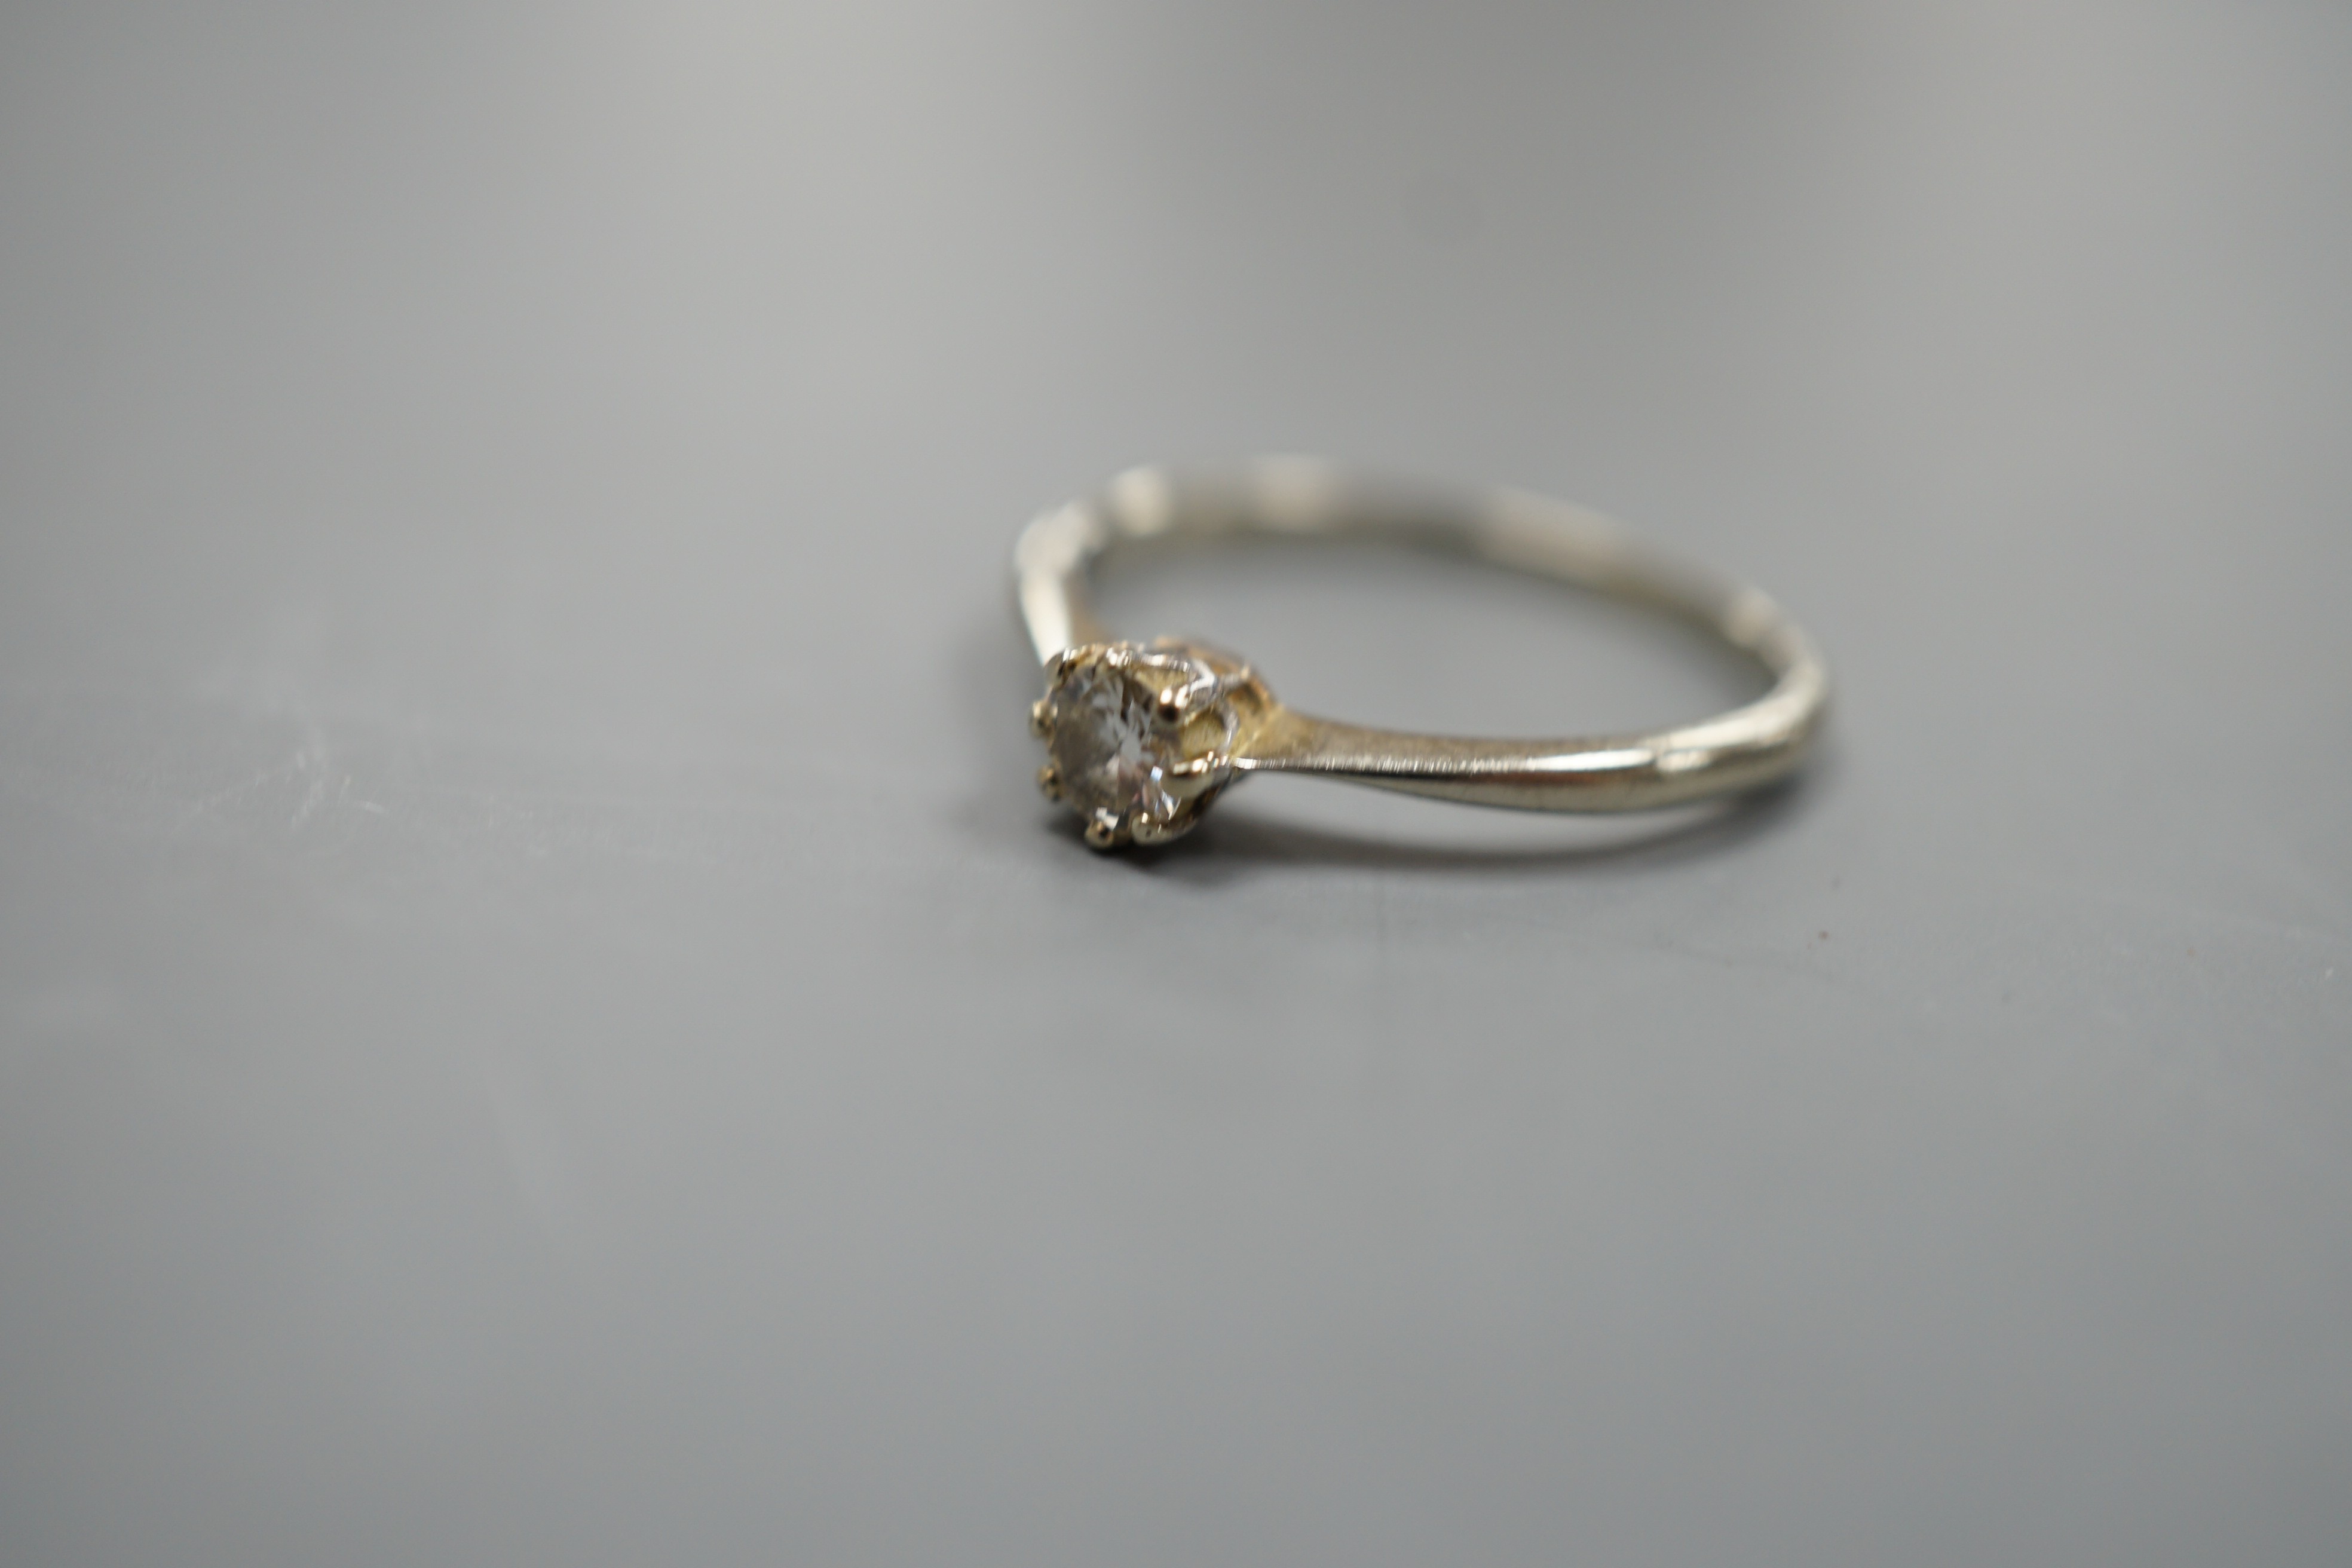 An 18ct and plat, solitaire diamond ring, size M, gross weight 1.7 grams.